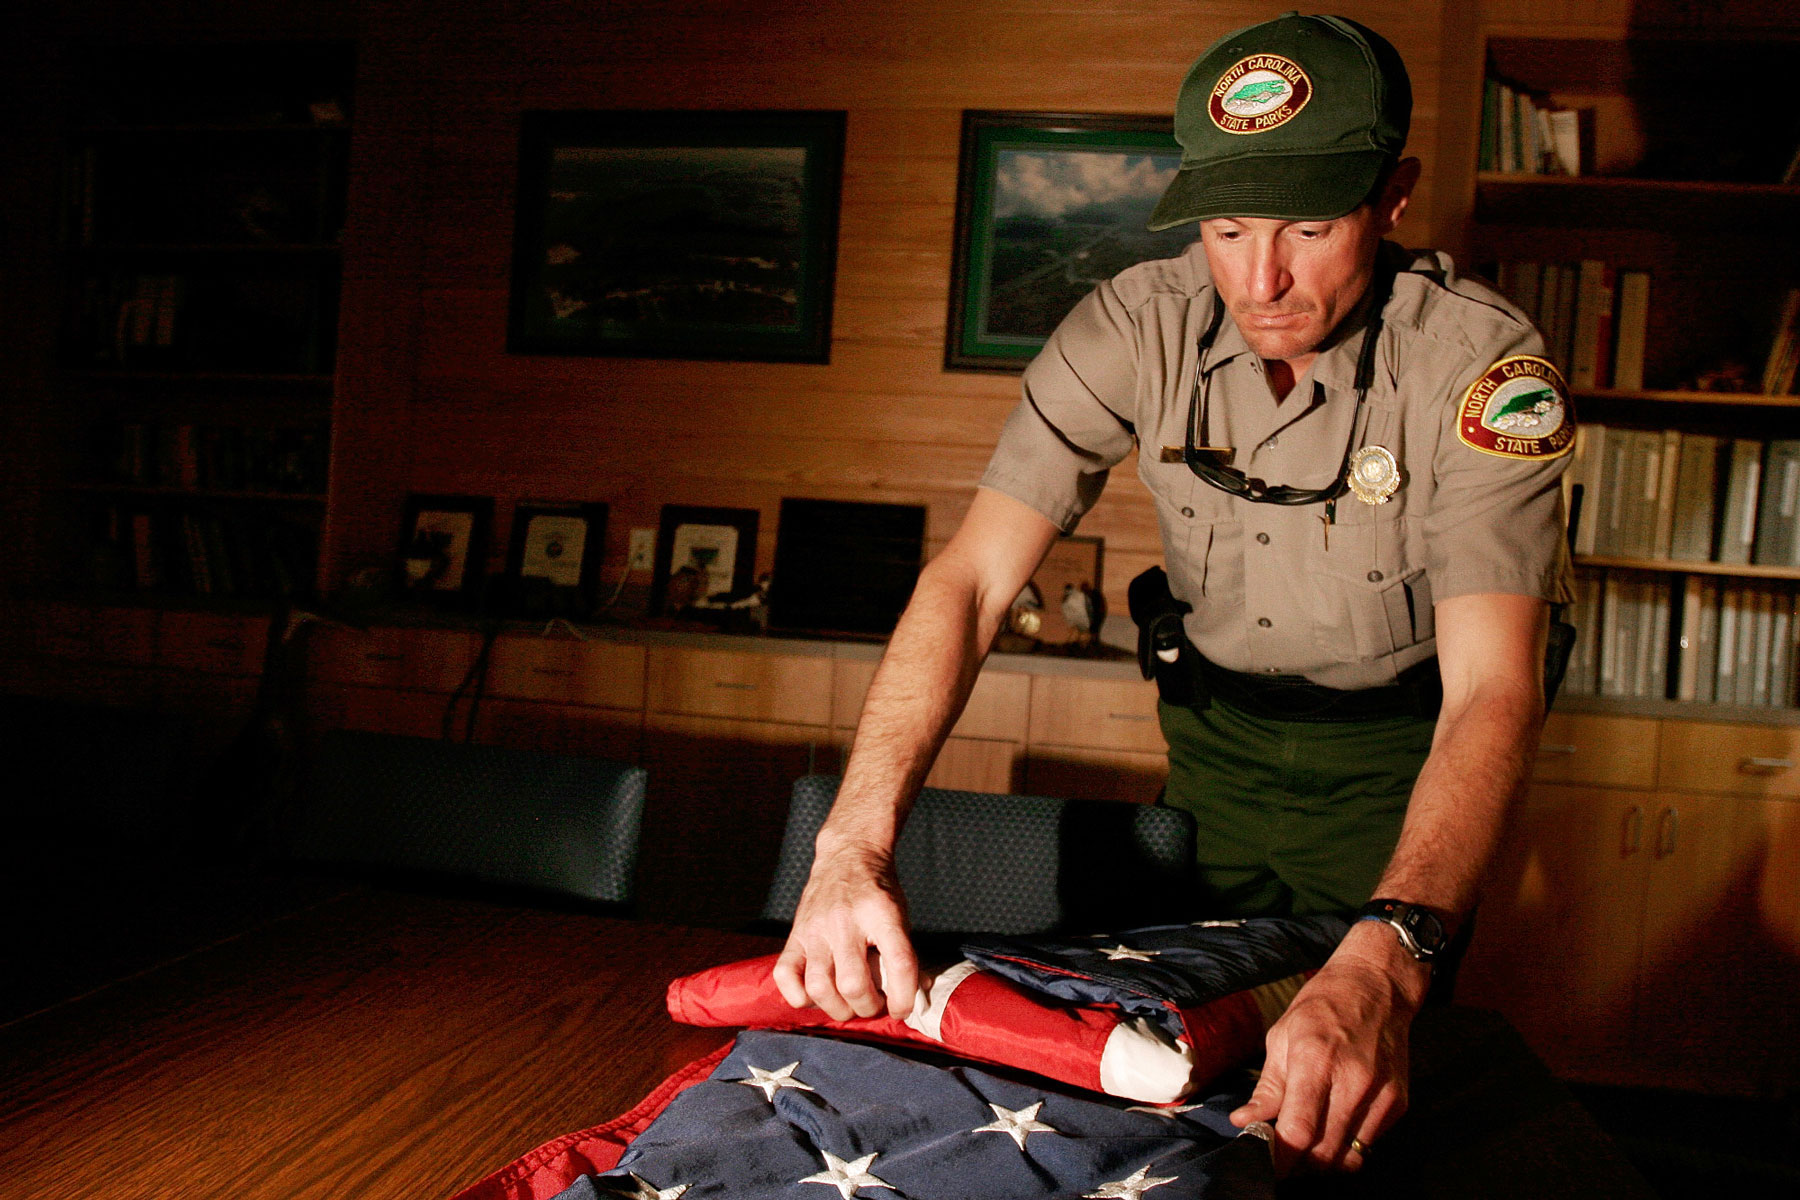 A man in a state park uniform folds an American flag